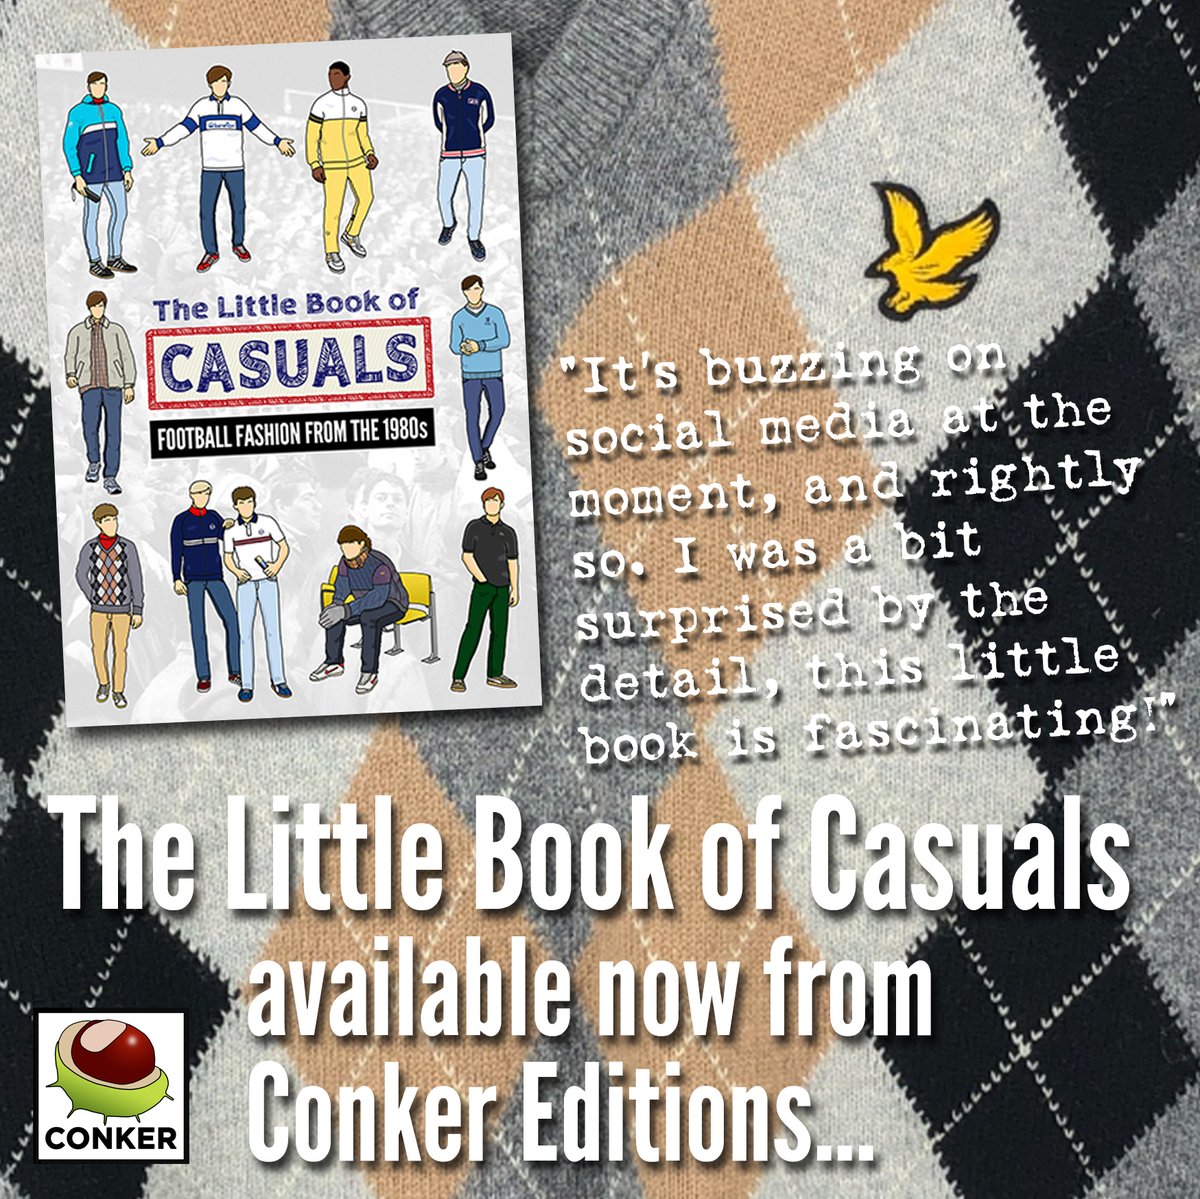 'The Little Book of Casuals - Football Fashion from the 80s'. A deep dive into the terrace cult that had no name, until it did. You can get an author signed copy from the Conker Shop: conkereditions.co.uk/shop/ Also available on Amazon: tinyurl.com/5byb66fv #casual #dressers